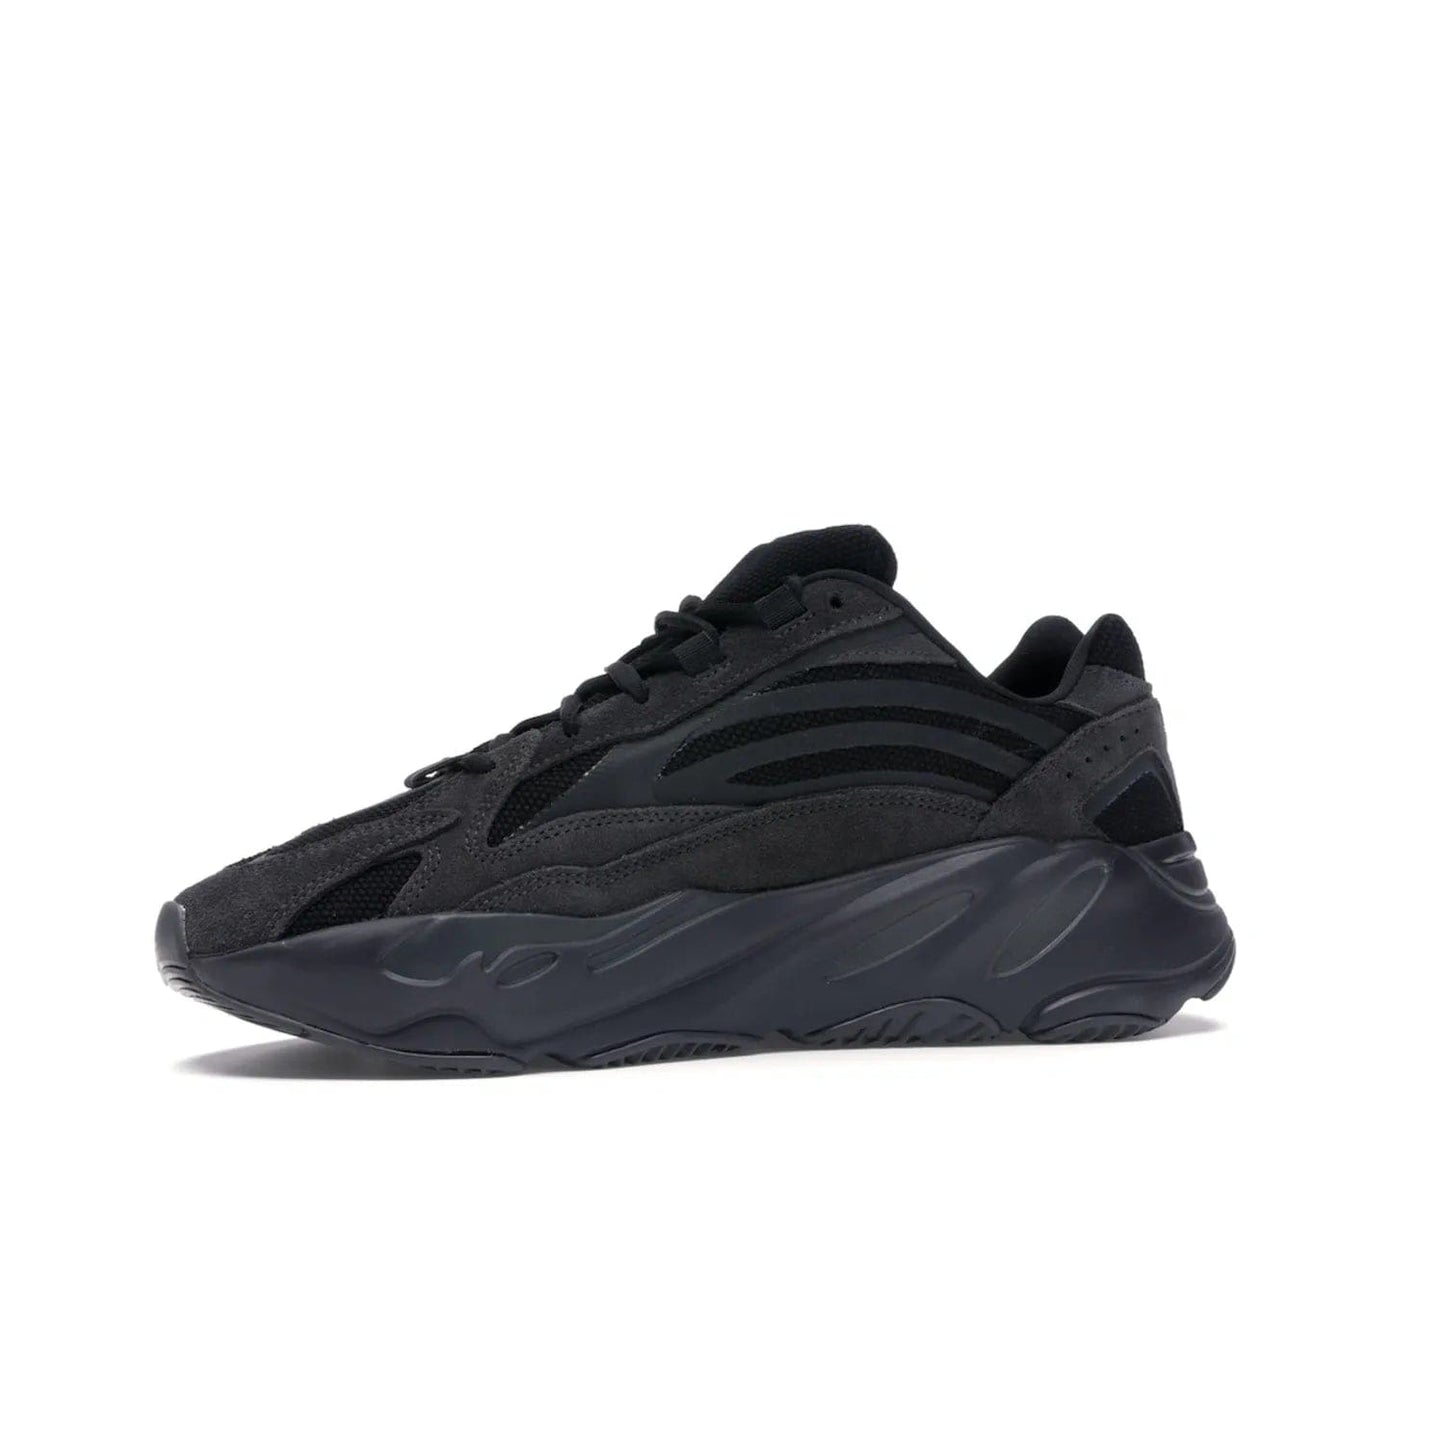 adidas Yeezy Boost 700 V2 Vanta - Image 17 - Only at www.BallersClubKickz.com - Introducing the adidas Yeezy Boost 700 V2 Vanta - a sleek and stylish all-black design featuring a combination of mesh, leather, and suede construction with signature Boost cushioning in the sole. The ultimate in comfort and support.